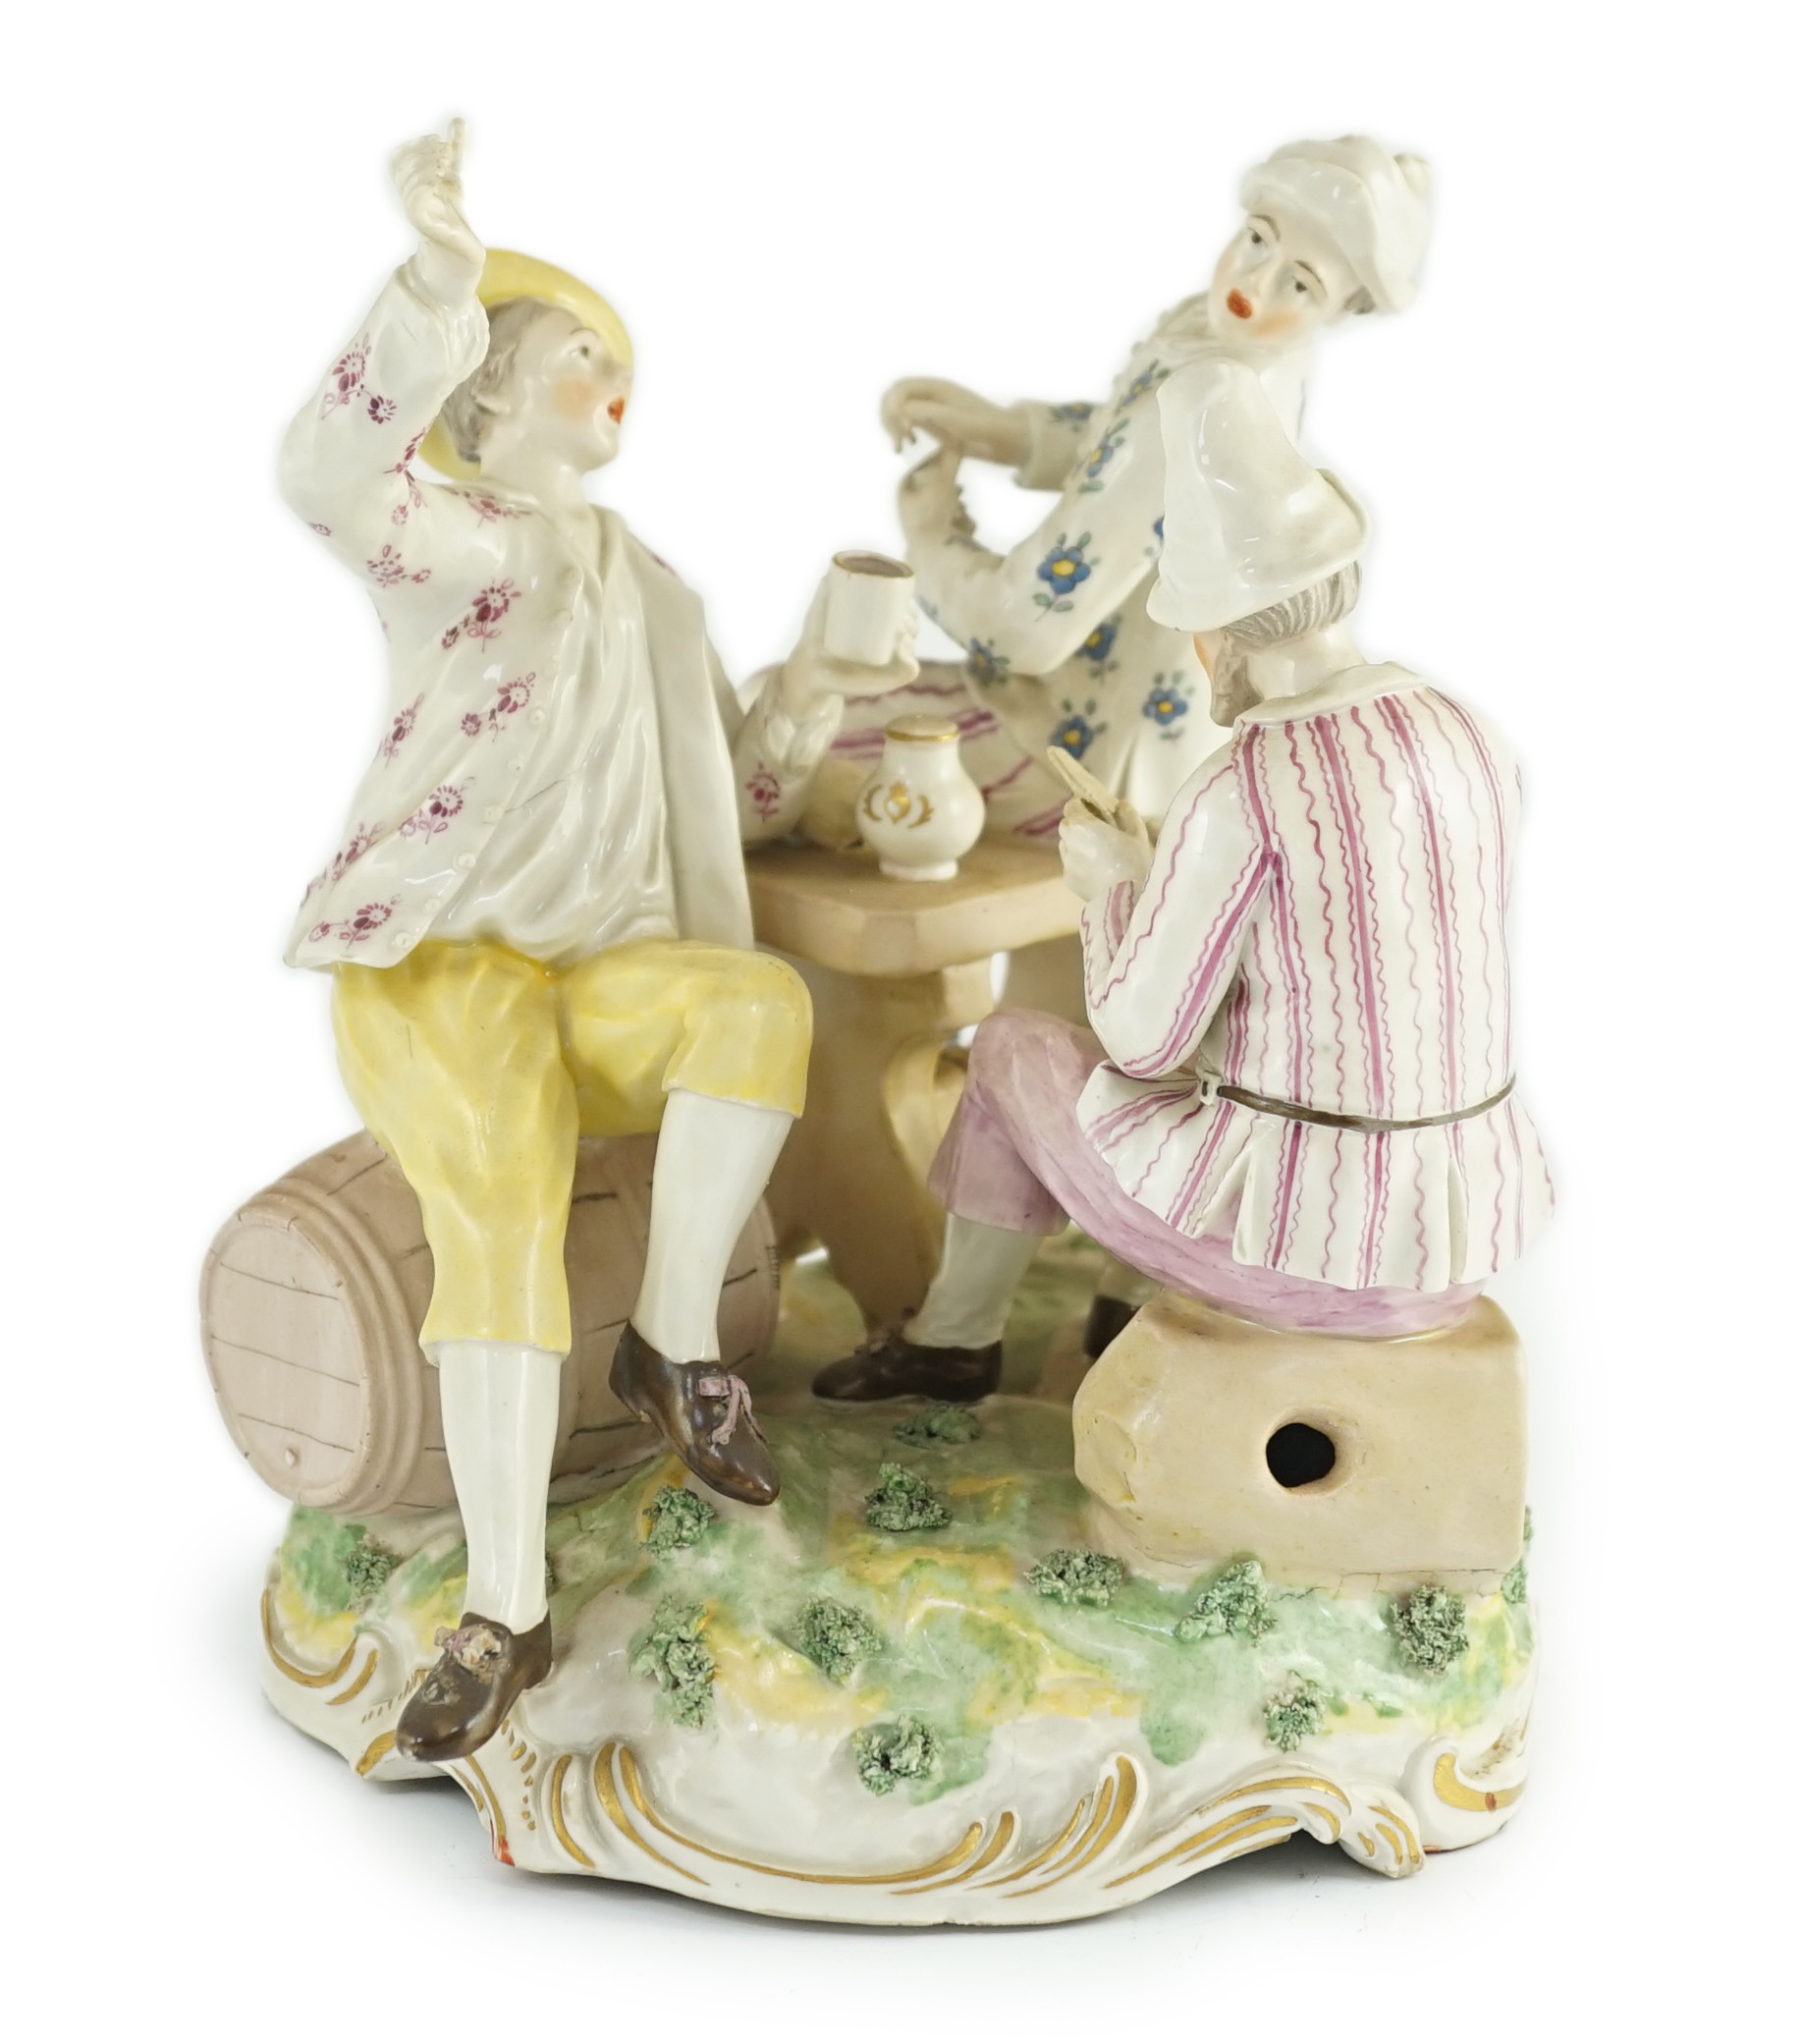 A Frankenthal porcelain group of three carousing men, c.1770-75, modelled by Karl Gottlieb Lück, 20cm high, 19cm wide, restored letter, Provenance - purchased from Winifred Williams, Eastbourne/London before 1970.